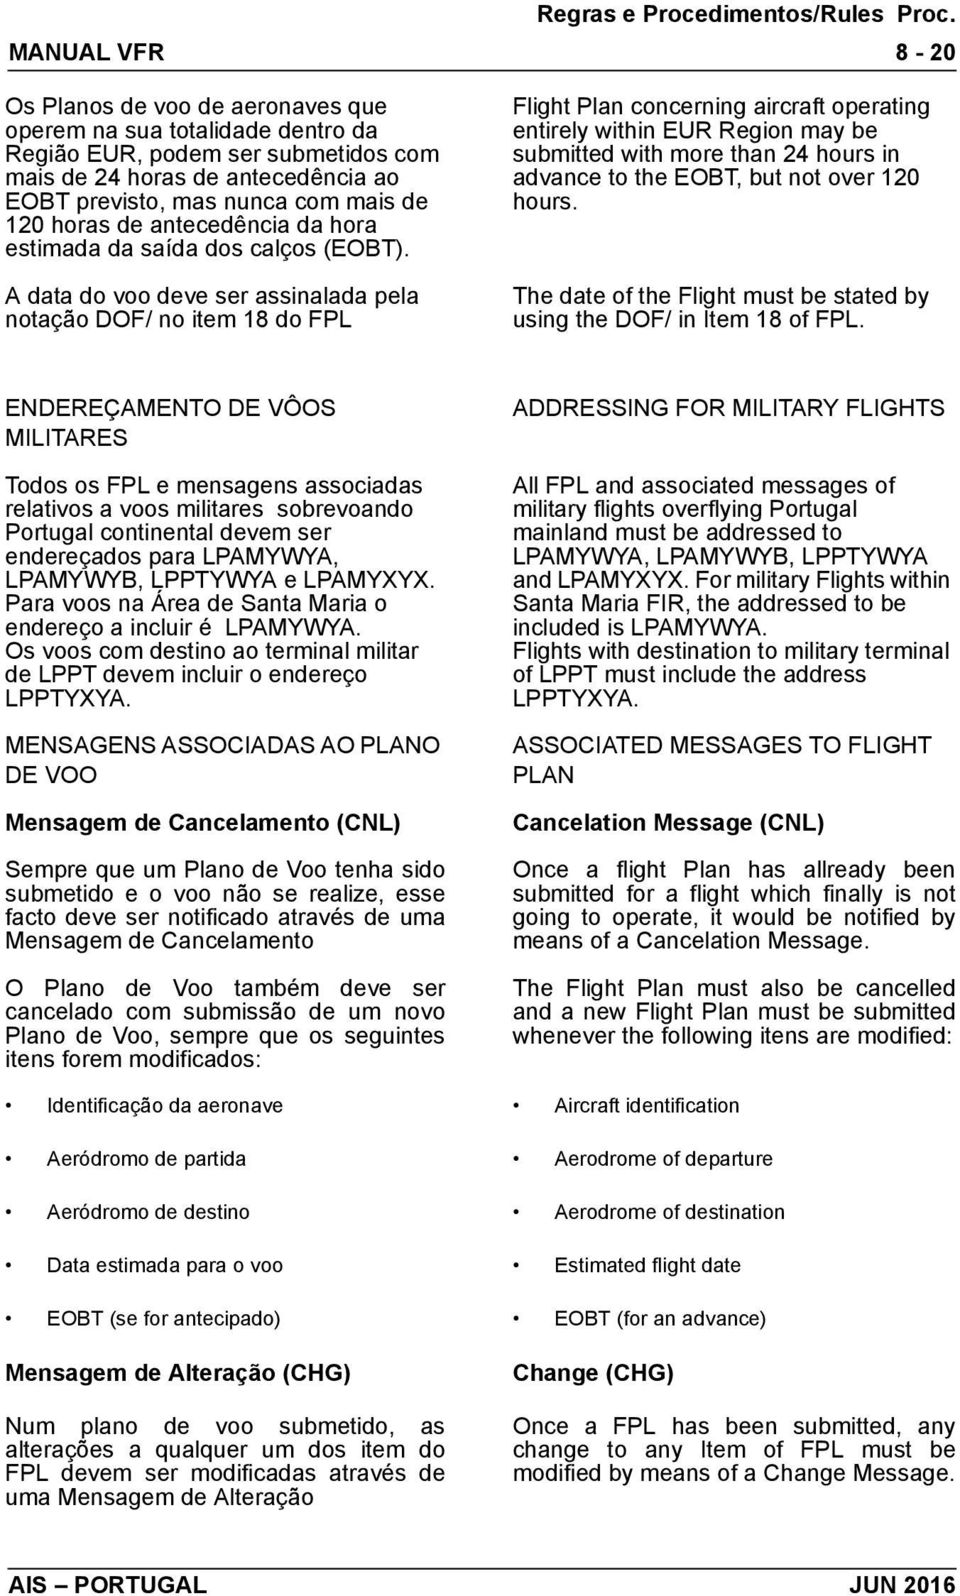 A data do voo deve ser assinalada pela notação DOF/ no item 18 do FPL 8-20 Flight Plan concerning aircraft operating entirely within EUR Region may be submitted with more than 24 hours in advance to